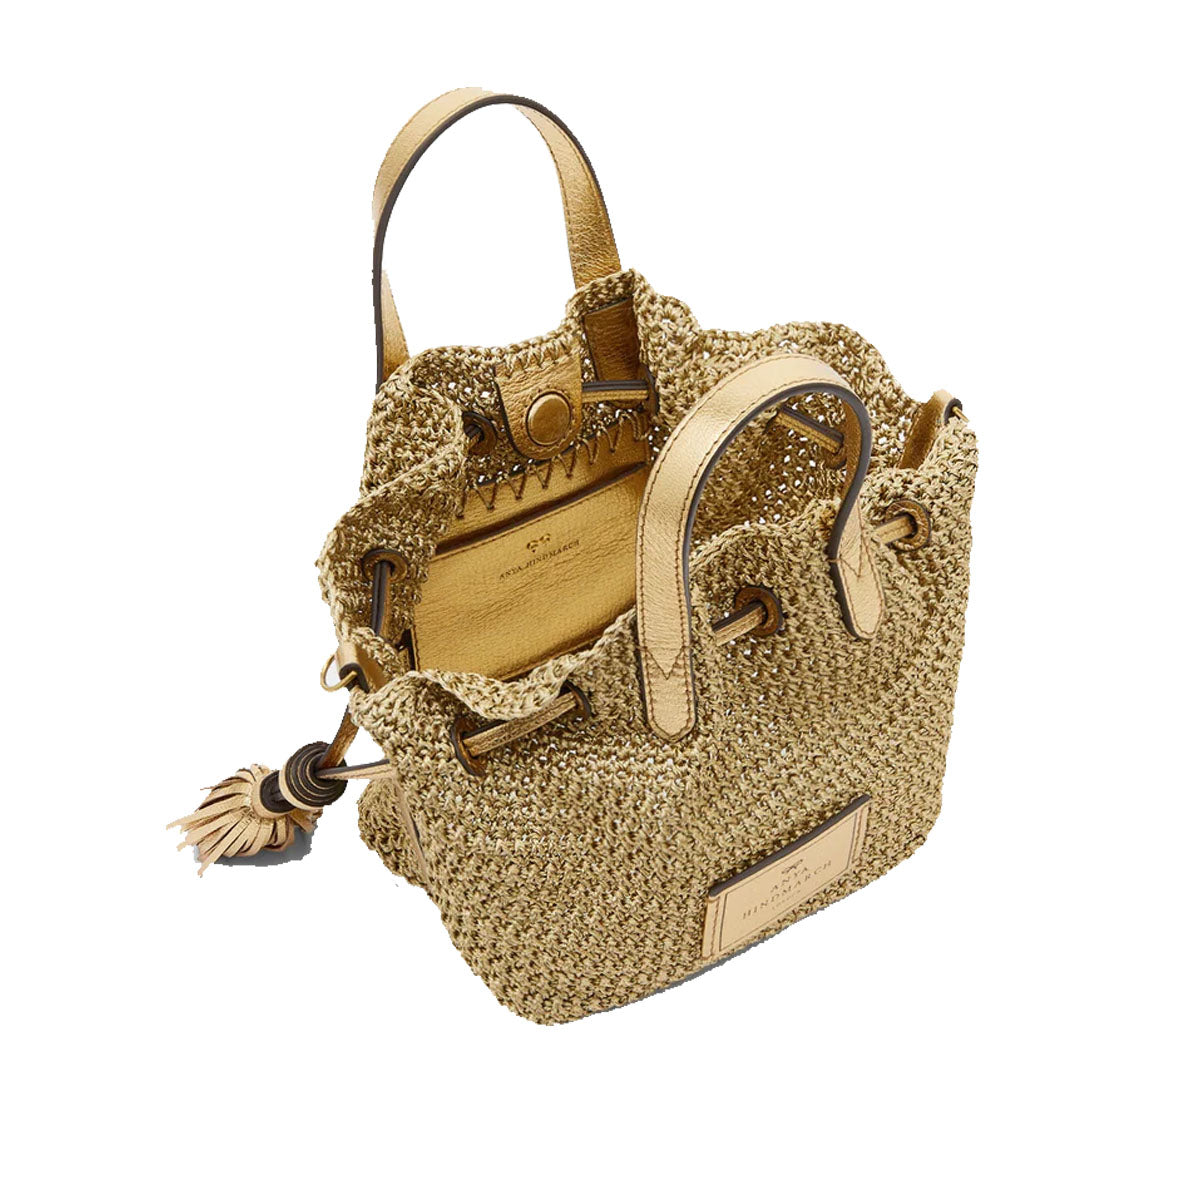 Lurex Drawstring Small Tote in Metallic Gold Leather - Anya Hindmarch